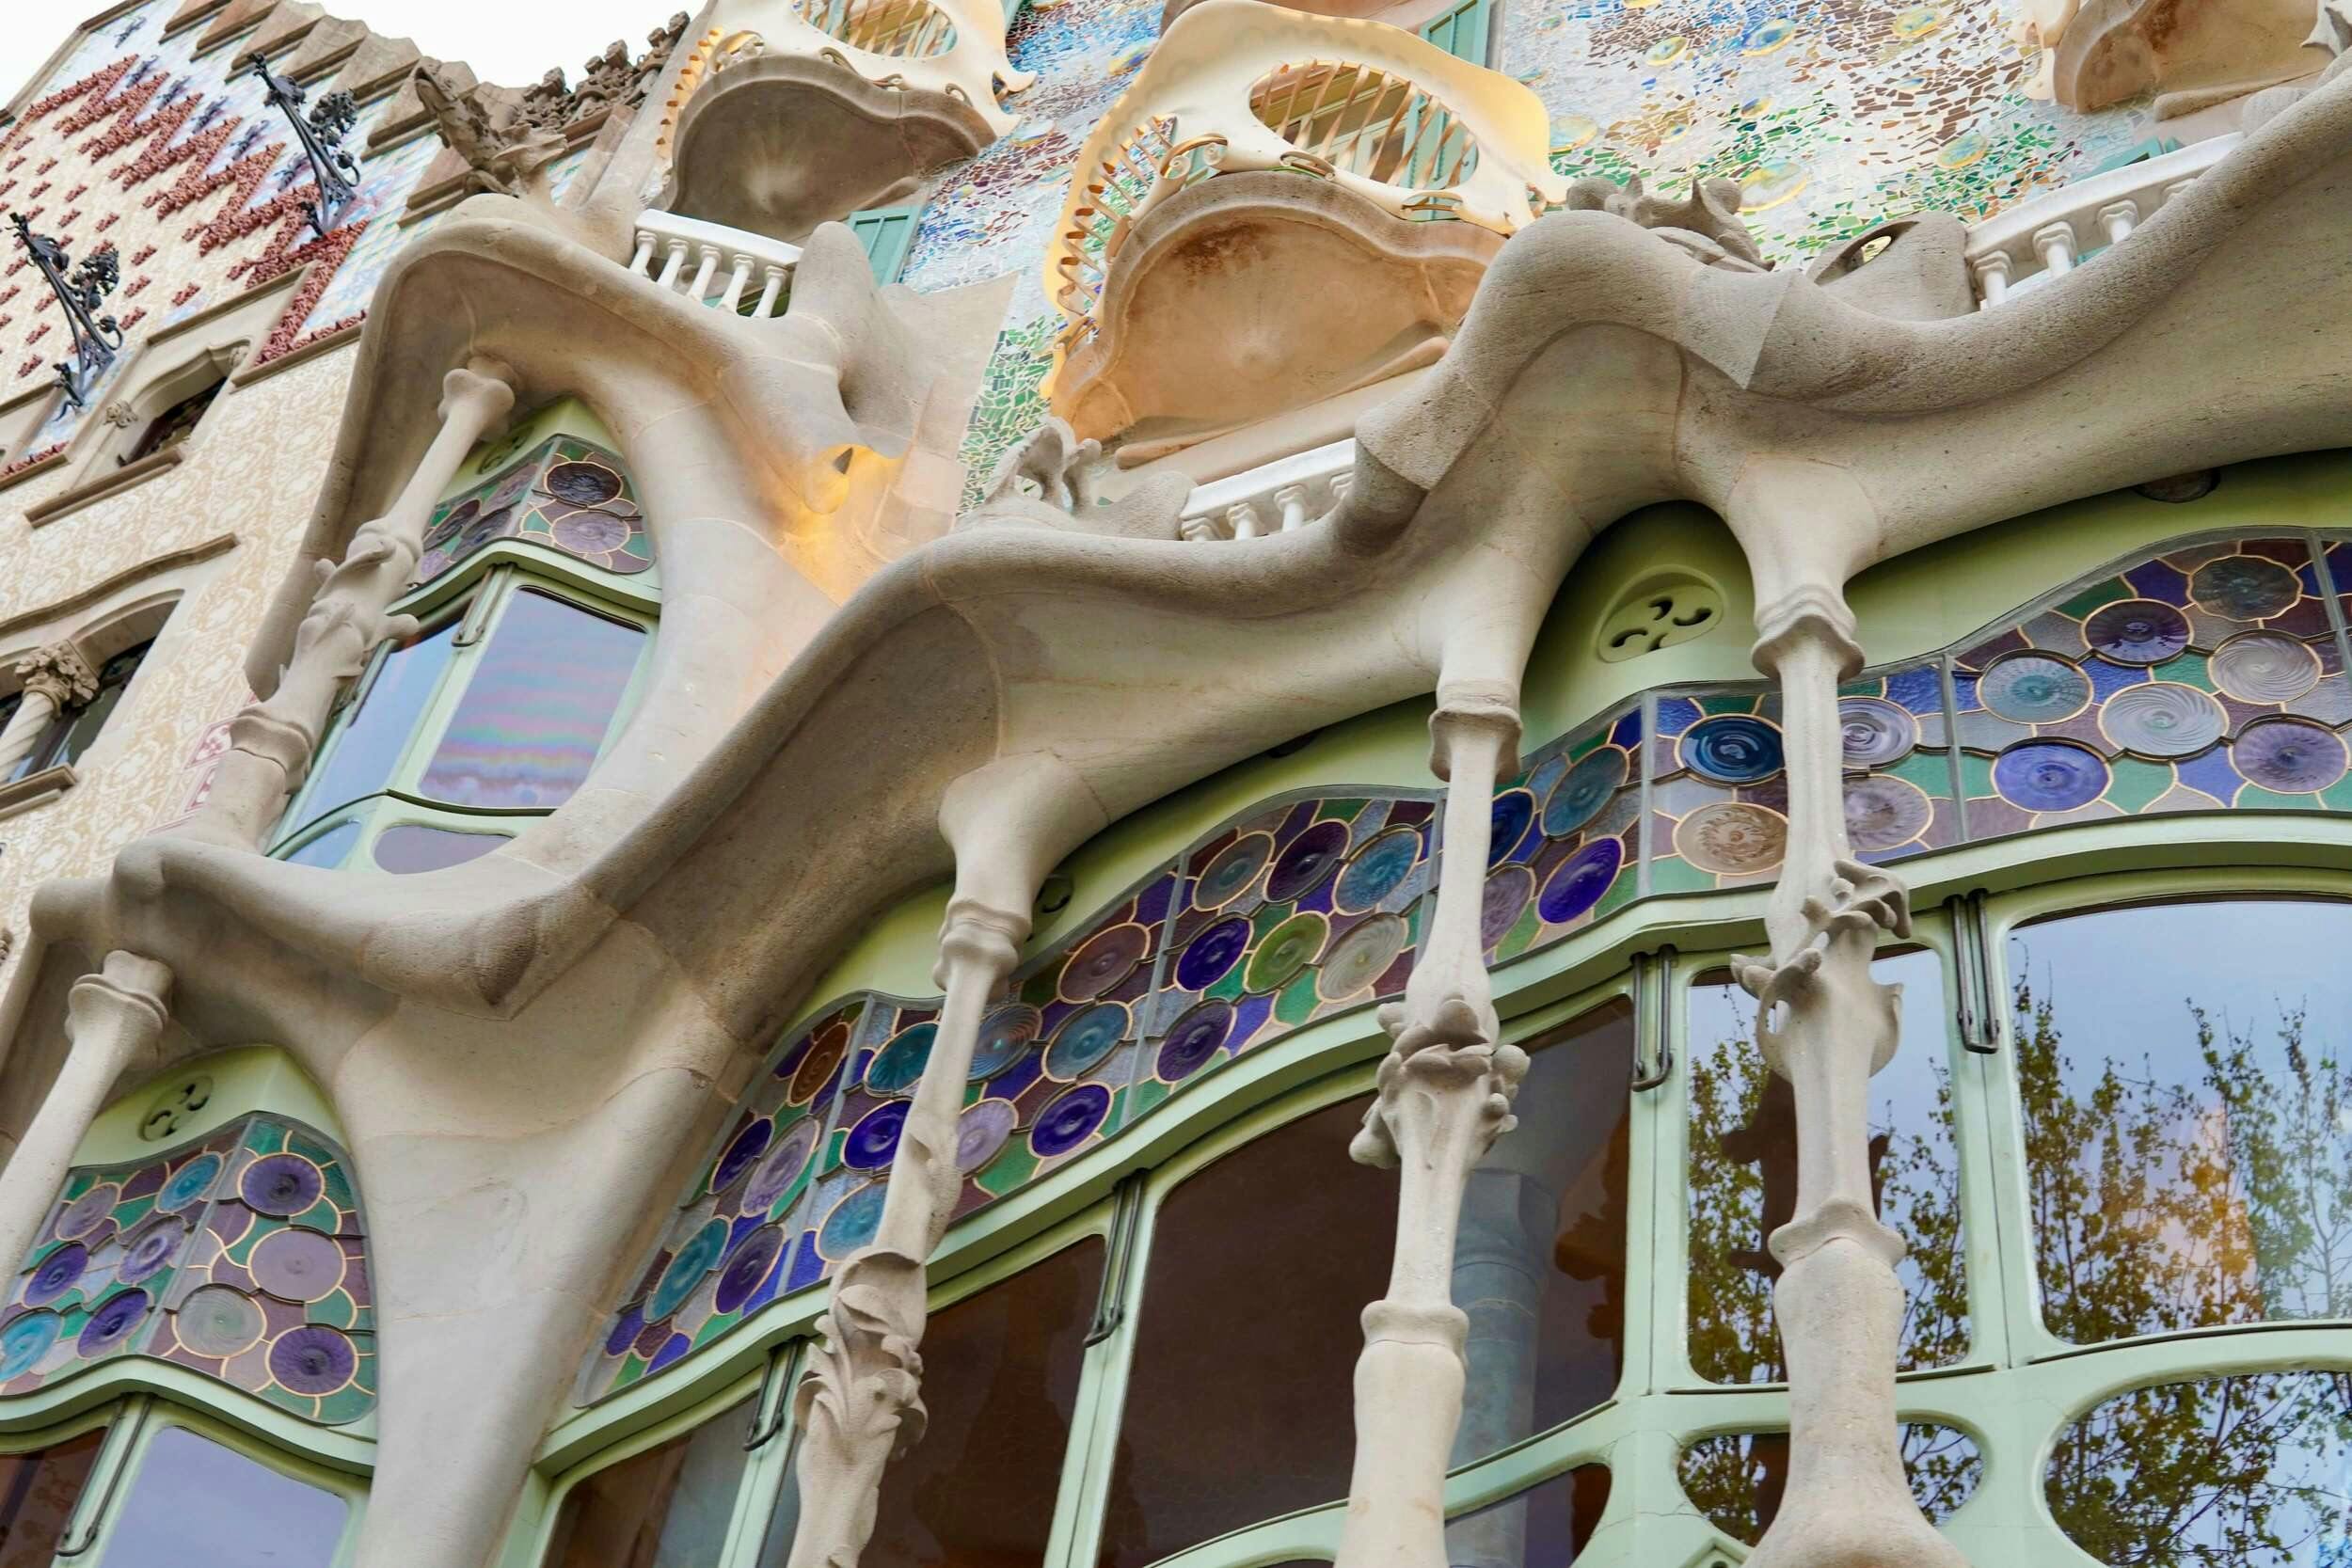 The colorful exterior of the house Casa Batlló